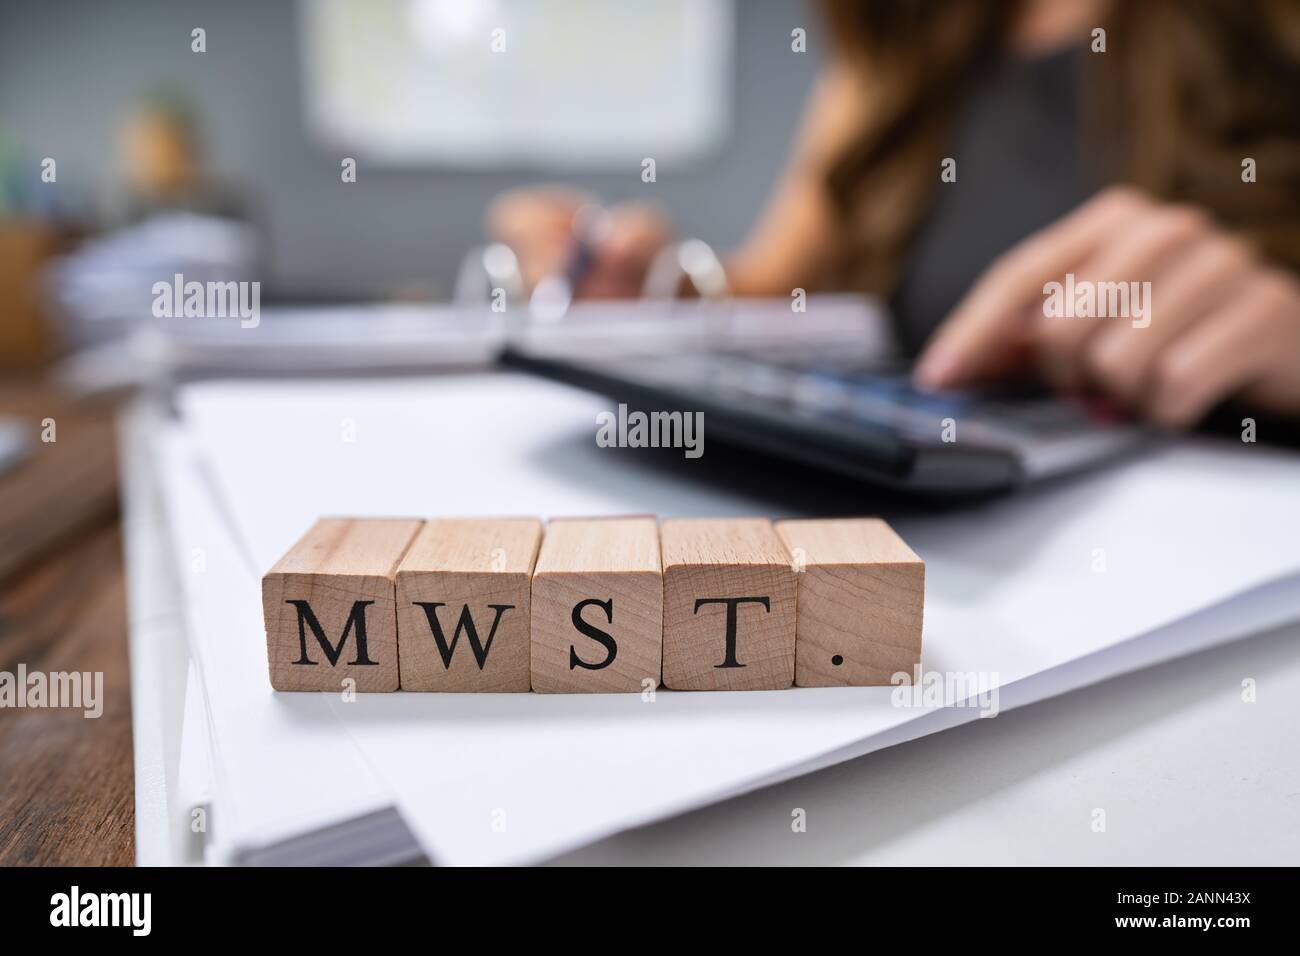 Businessperson Calculating MwSt. - Value-added tax in Germany Stock Photo